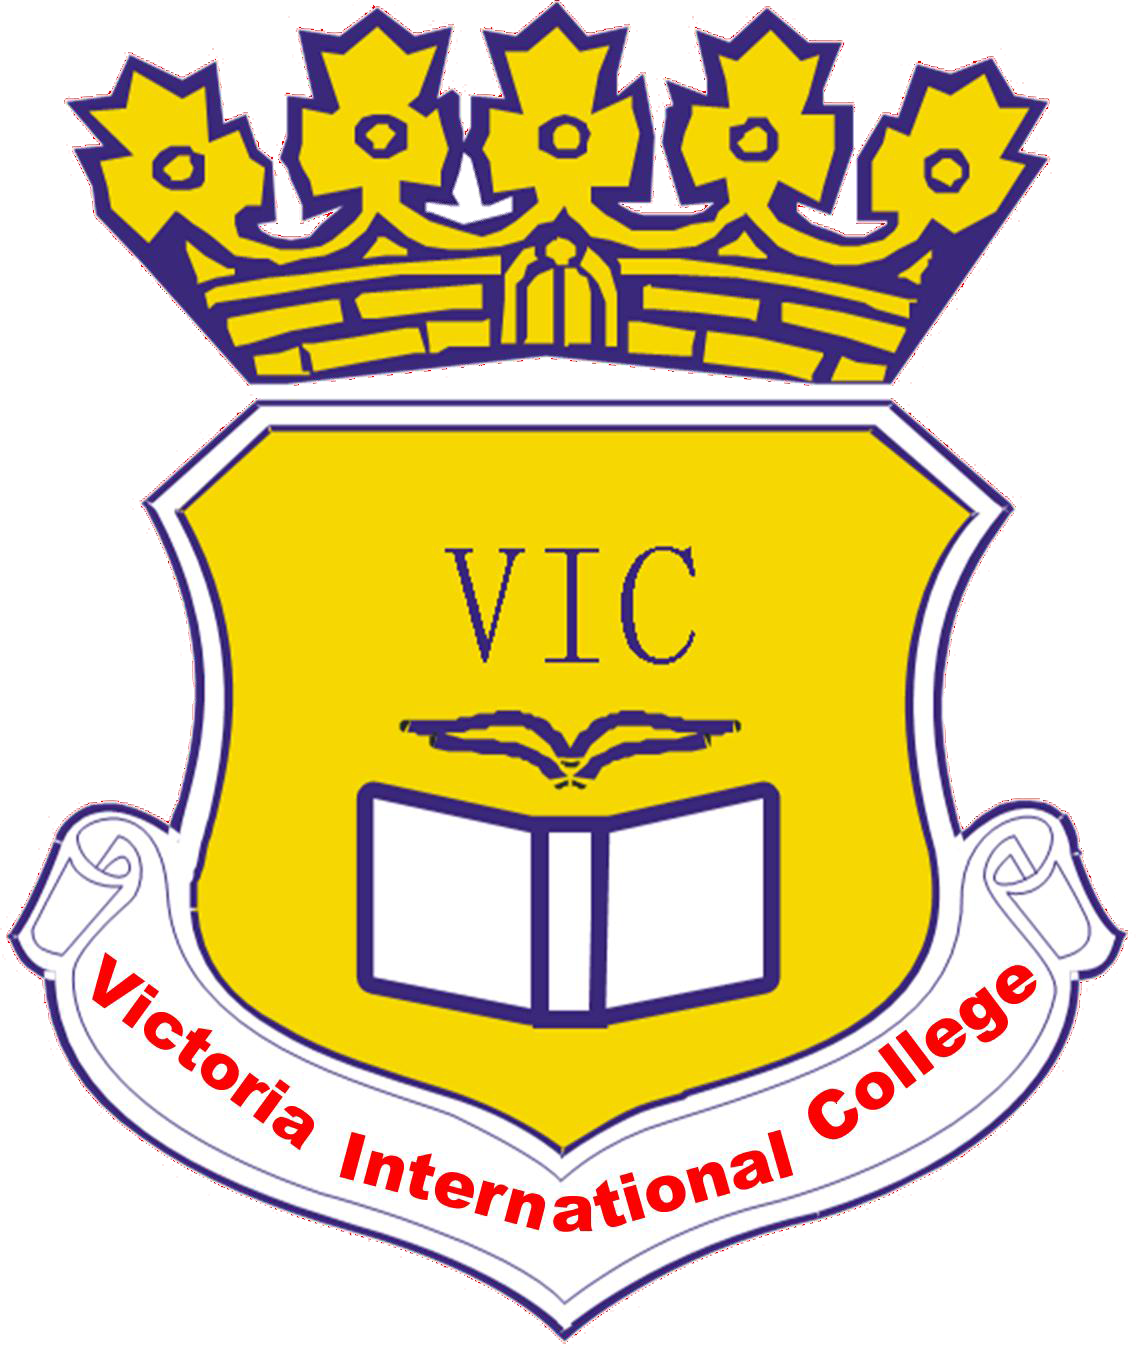 federal aid, Victoria International College of Business & Technology, Personal Support Worker, PSW, Software Development, Computerized Accounting, Early Childcare Assistant, ECA, Certified Quality Engineer, CQE